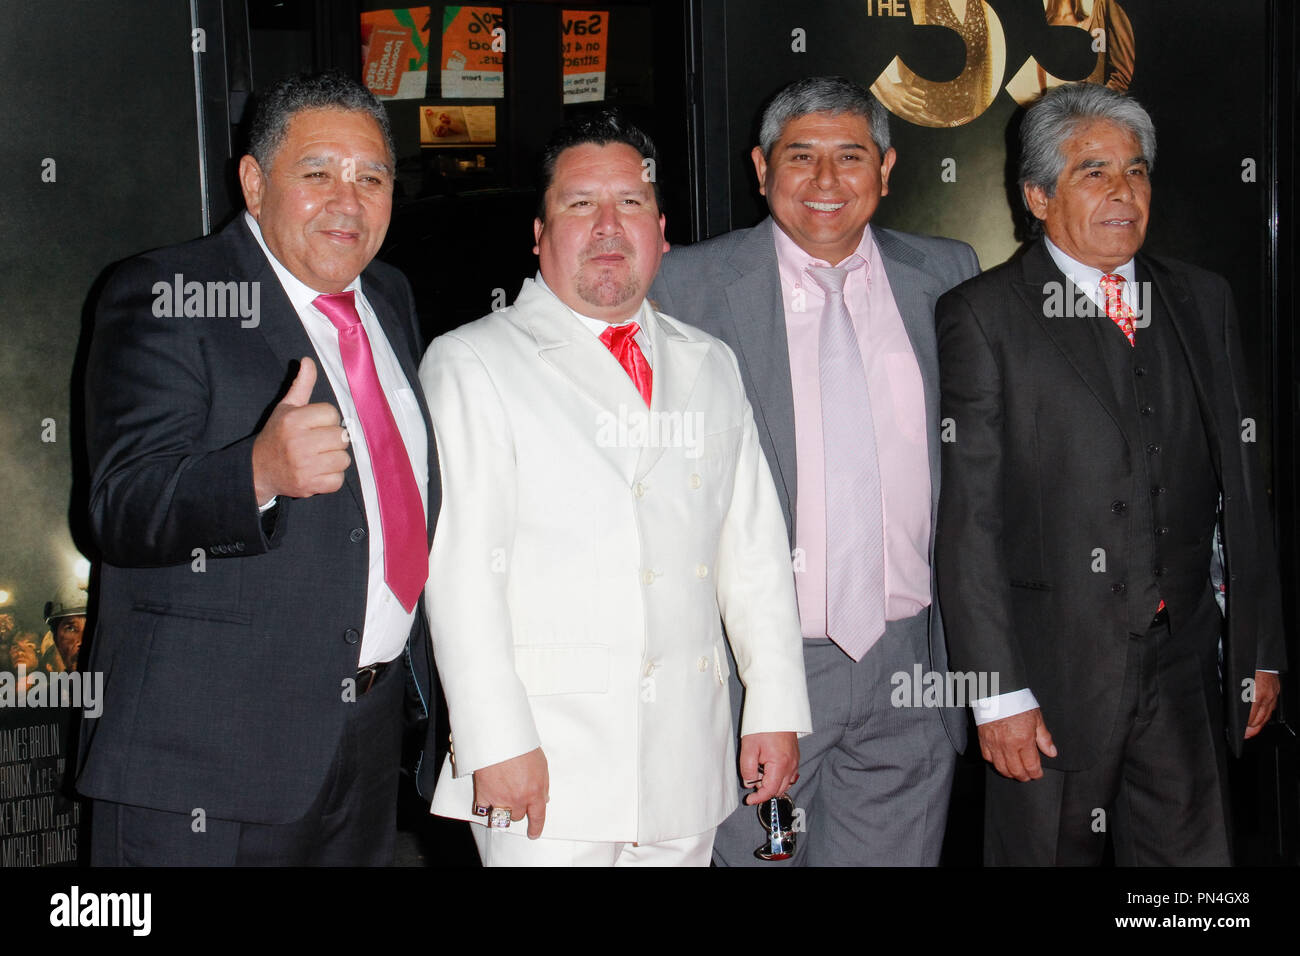 Luis Urzua, Edison 'Elvis' Pena, Juan Carlos Aguilar and Mario G at Warner Bros.' 'The 33'' Gala Screening at AFI Fest 2015  held at the TCL Chinese Theater in Hollywood, CA, November 9, 2015. Photo by Joe Martinez / PictureLux Stock Photo